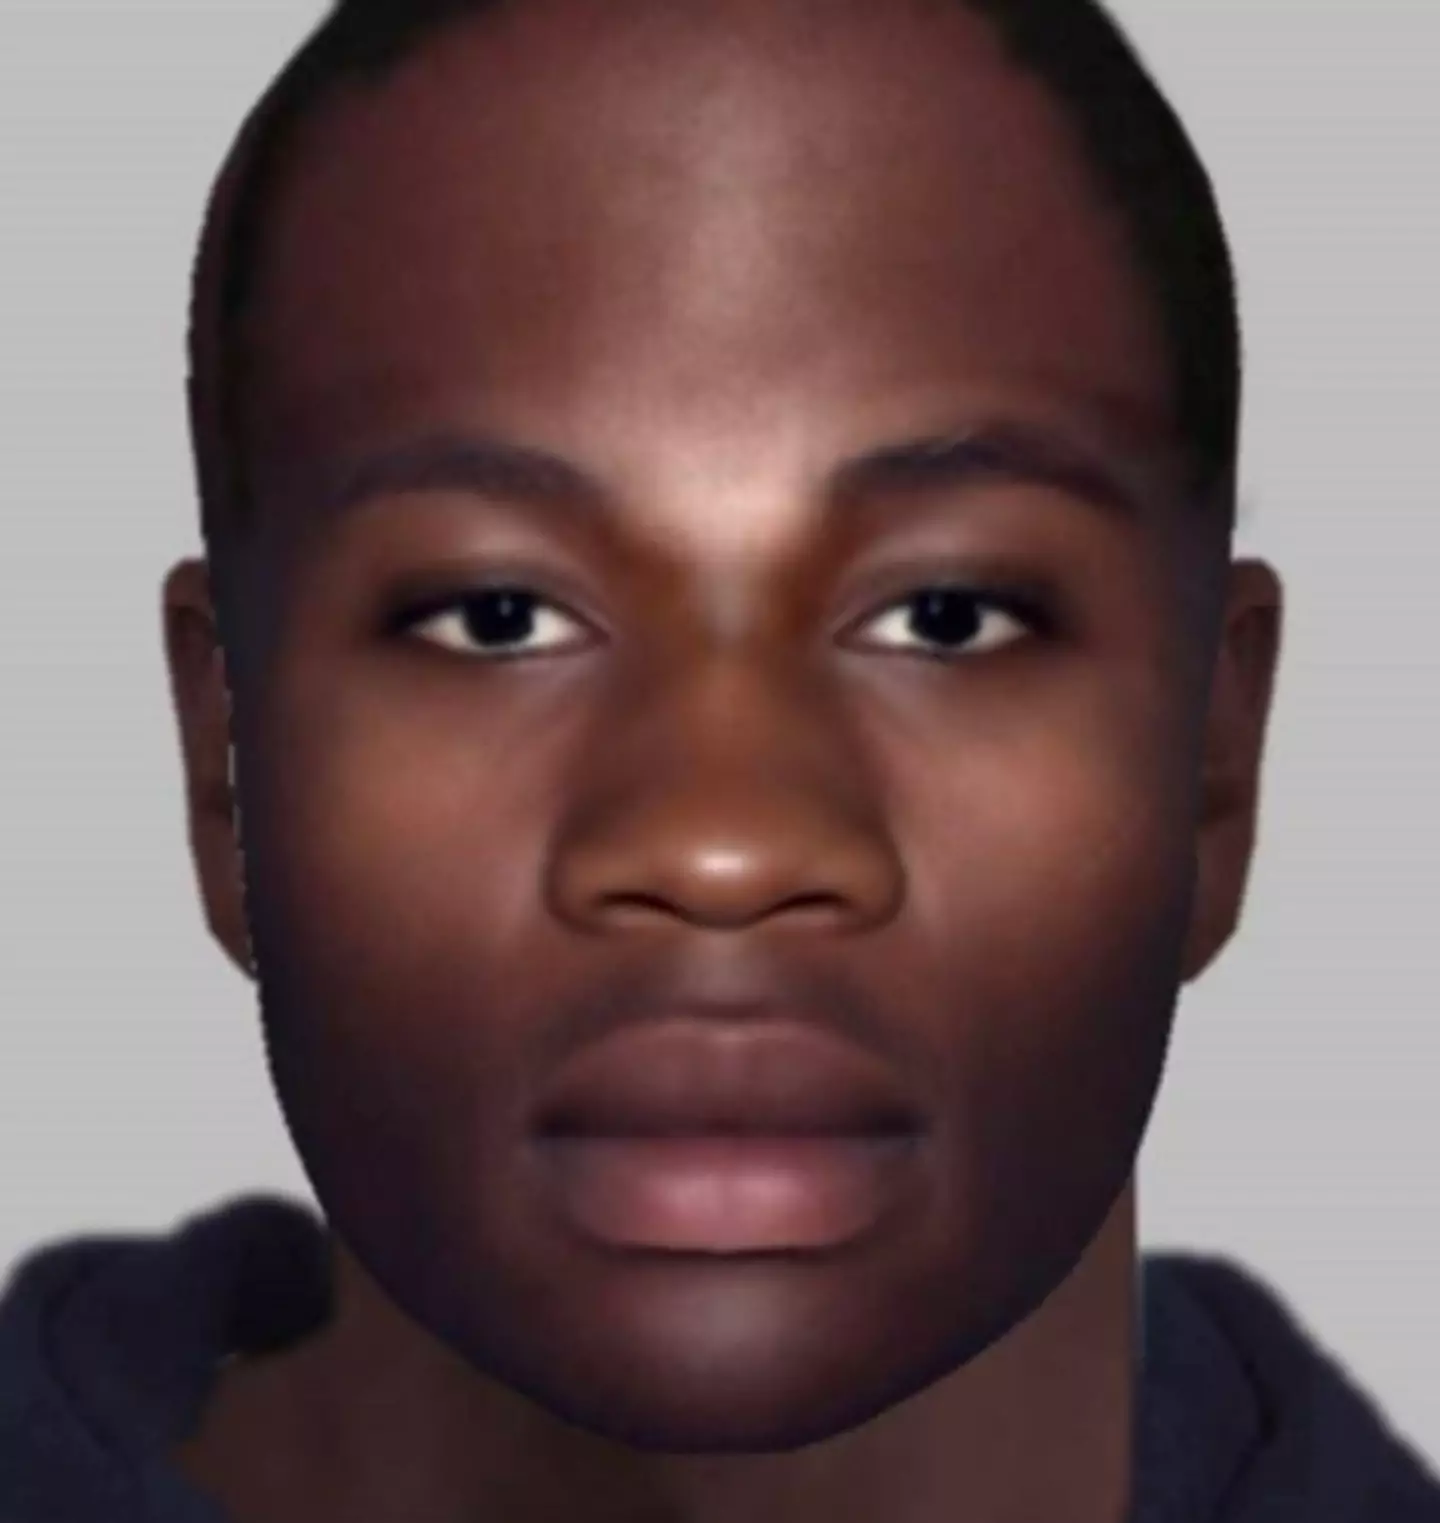 An e-fit of the man whose body was found in the plane's undercarriage.